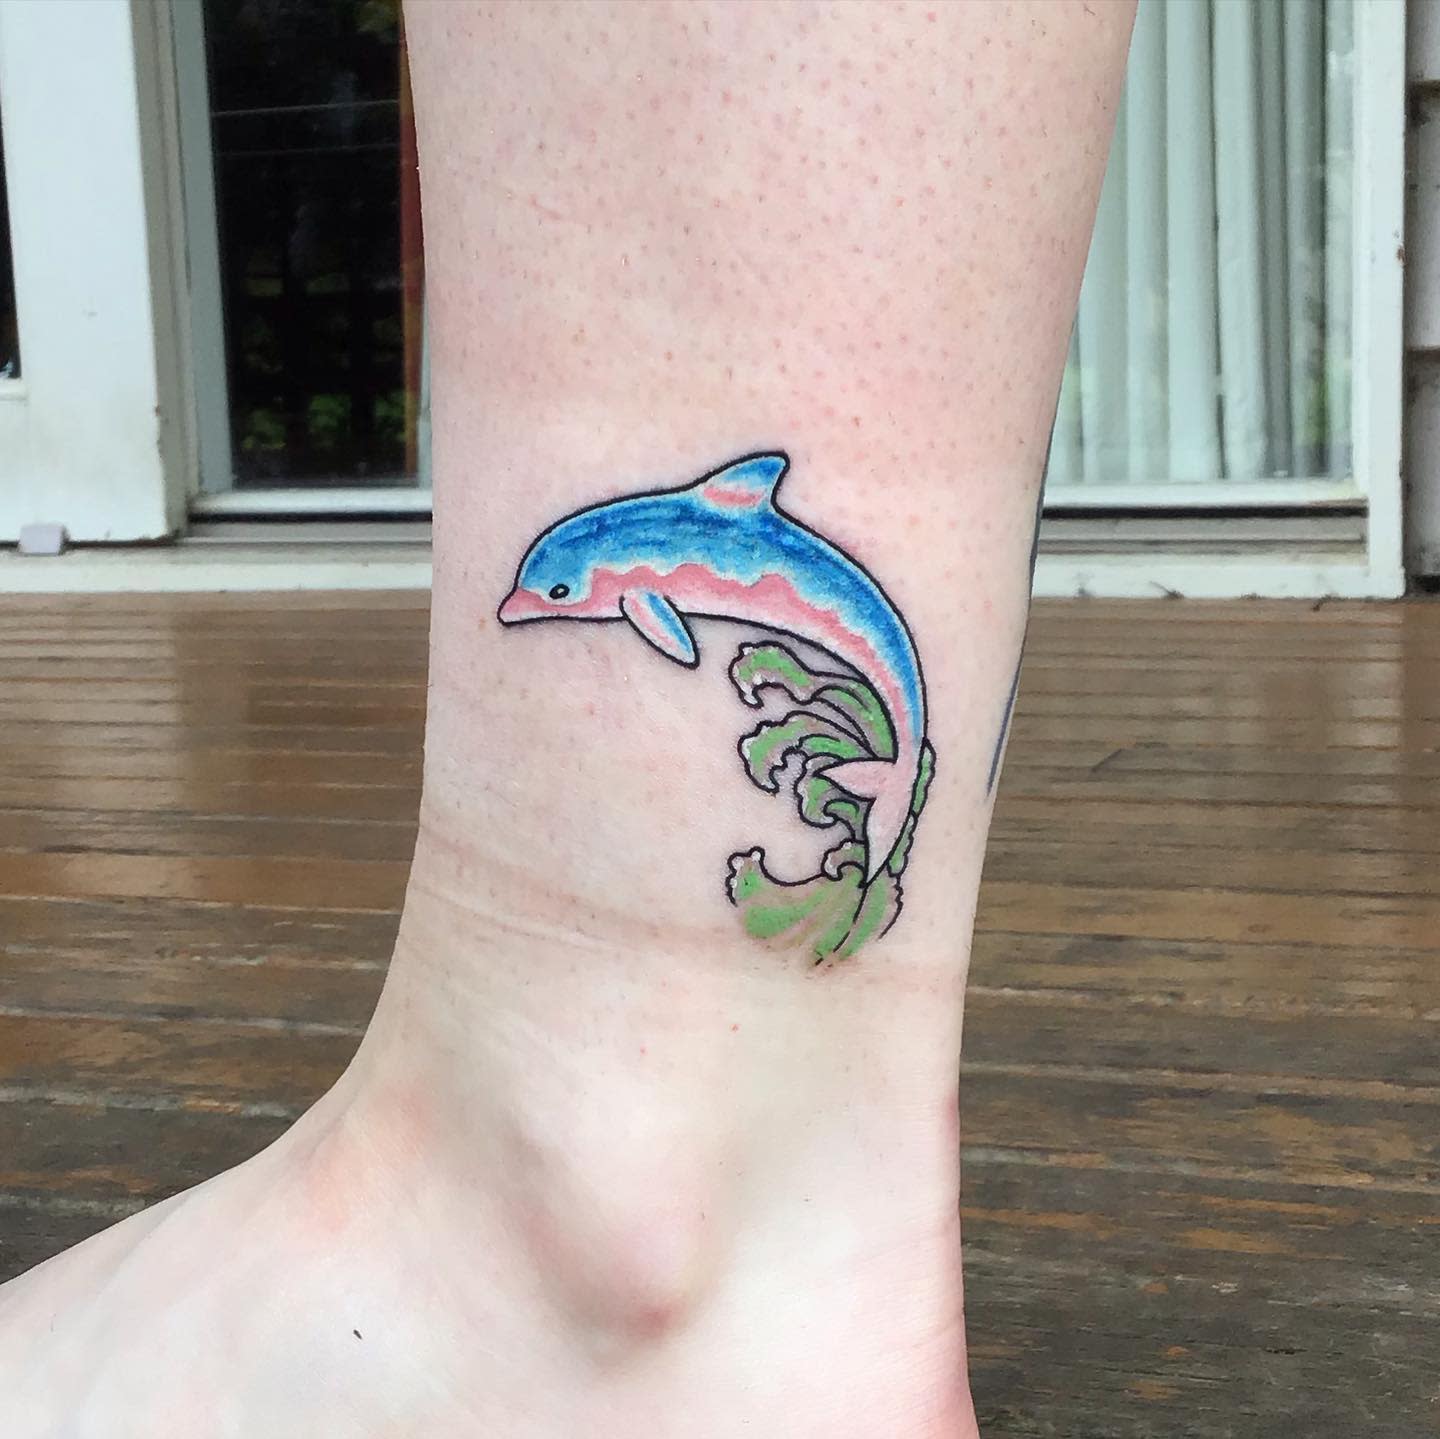 Dolphin ankle tattoo by qiangzitattoo on DeviantArt